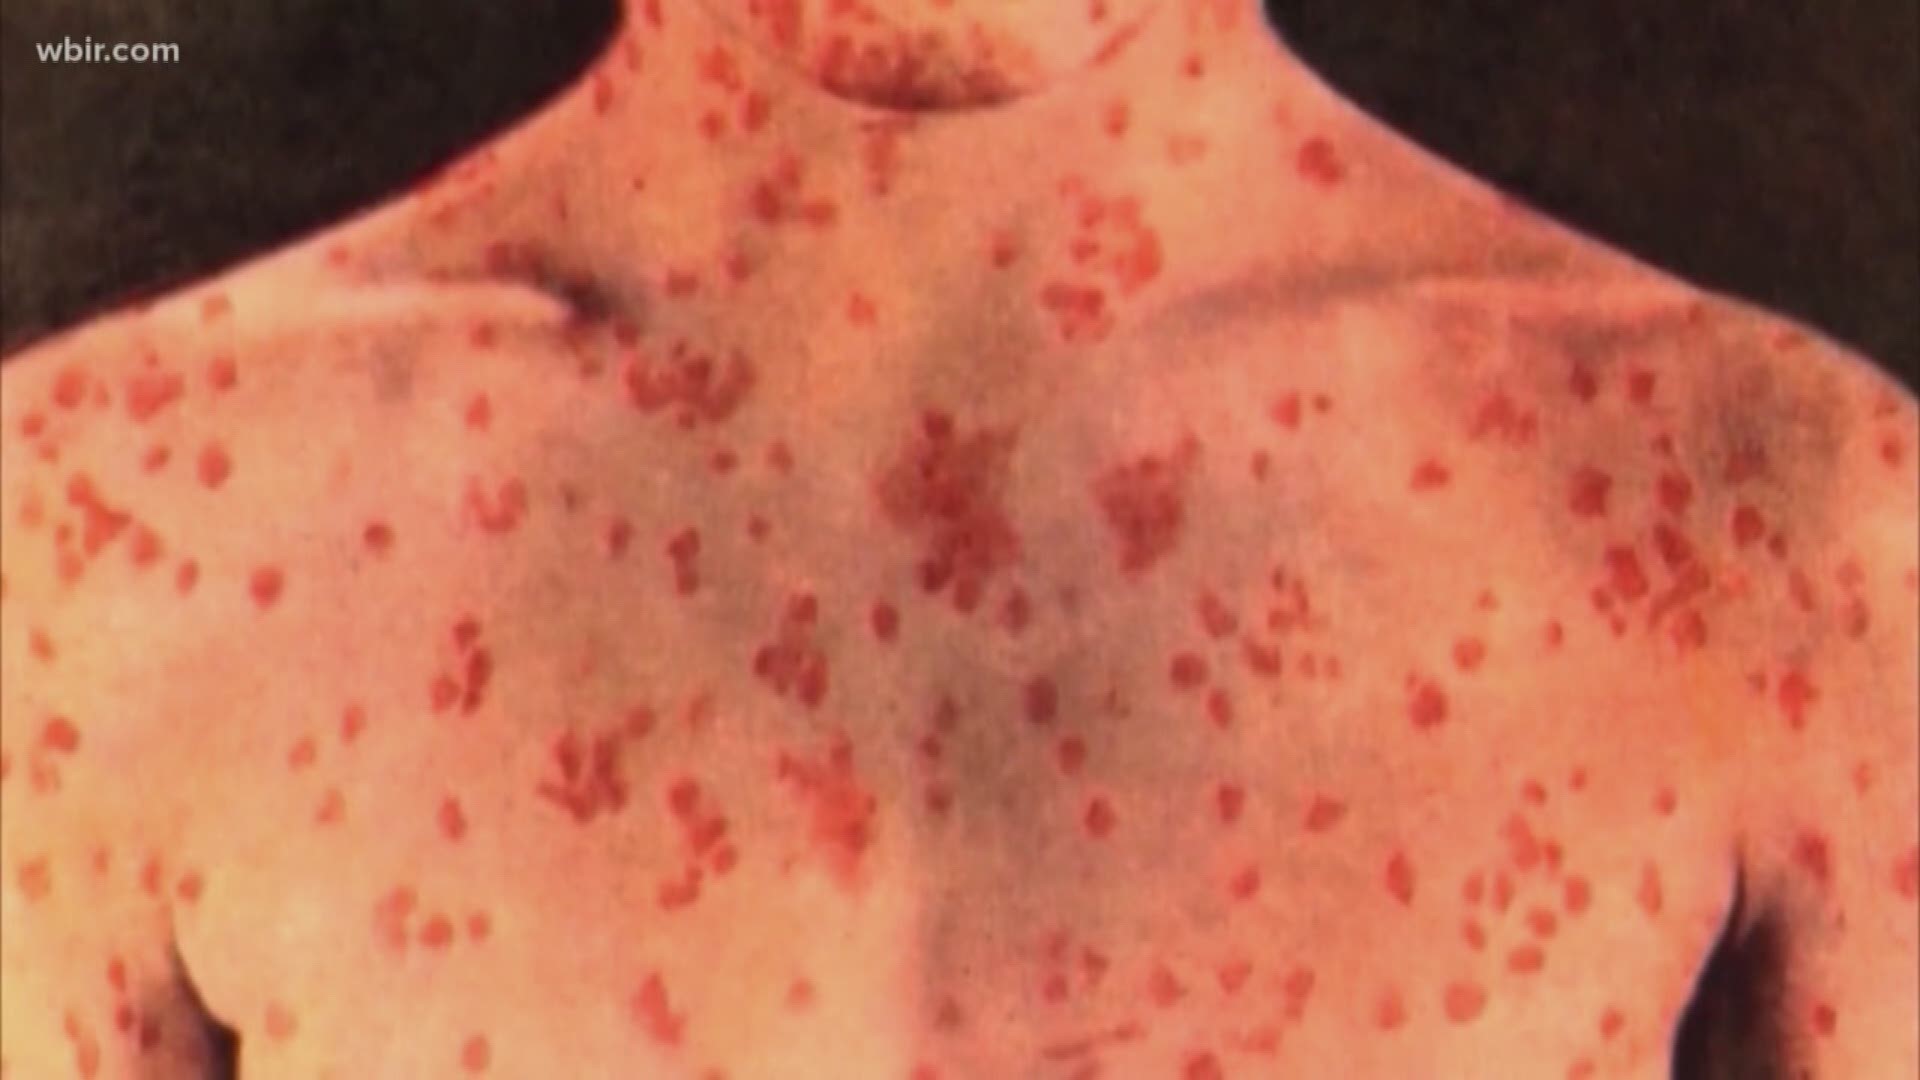 The state health department says it is no longer concerned about any new measles cases stemming from the original patient in Tennessee. The department says the investigation into the measles outbreak is still ongoing and it is monitoring some people who may have been exposed. There have been 5 measles cases in the state since the original patient brought it to Tennessee last month.